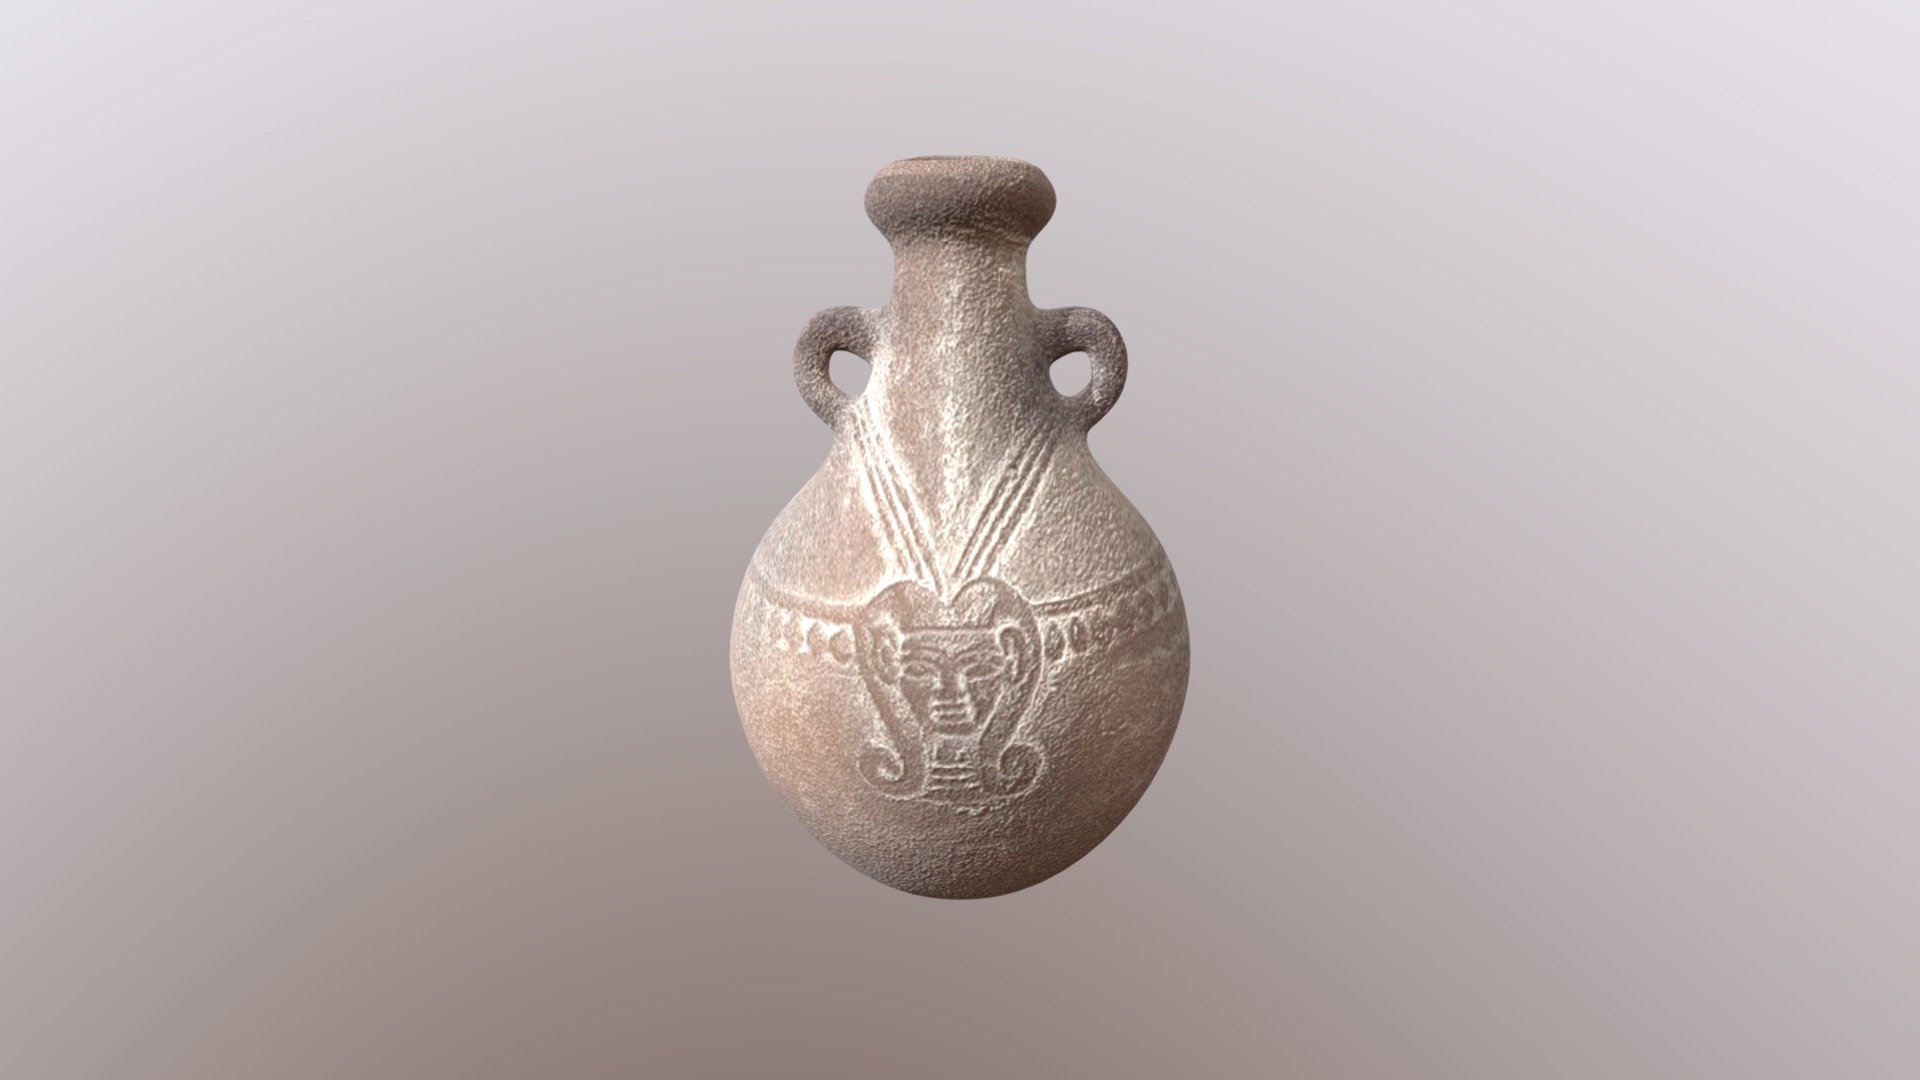 About the 3D Model:

This 3D model is a replica of an ancient Egyptian ceramic pot or flask from the late period (664-30 BC).

The 3D model is a piece of clay art ornamented with the carving of Hathor, the ancient Egyptian goddess of love and motherhood.

The pot was used in ancient Egypt to store beverages or as a decoration. To make the replica, ready-made textures and internal materials have been used to give this model is current look.

**Technical Details about the Model: **

The original file format is blend. Other available formats are: OBJ, FBX, 3DS,  and STL, all of which have been tested before uploading. The blend file comes with a lighting setting.

The flask will render easily and like on thumbnails. This is because it is originally a PBR model with an image texture and maps: normal, occlusion, and displacement. These can be easily modified or removed to give the jar a different look. 

Thank you!! - Ancient Egyptian Jar - Buy Royalty Free 3D model by Humphrorange 3d model